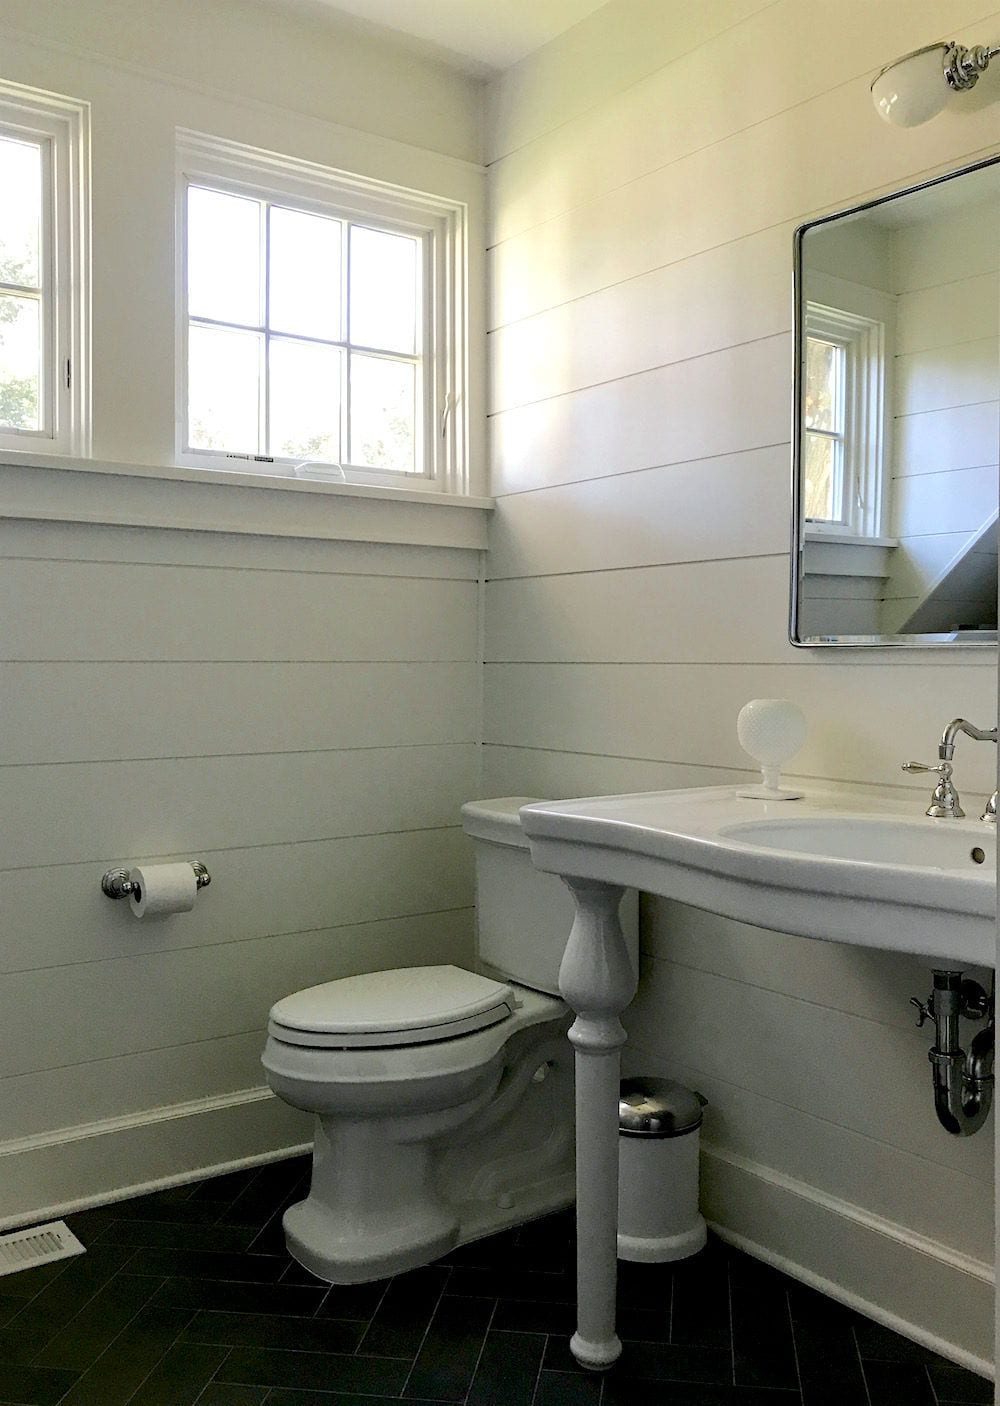 renovated barn- simple bathroom-interior designer - home stager - Lotte Meister - Rye, NY